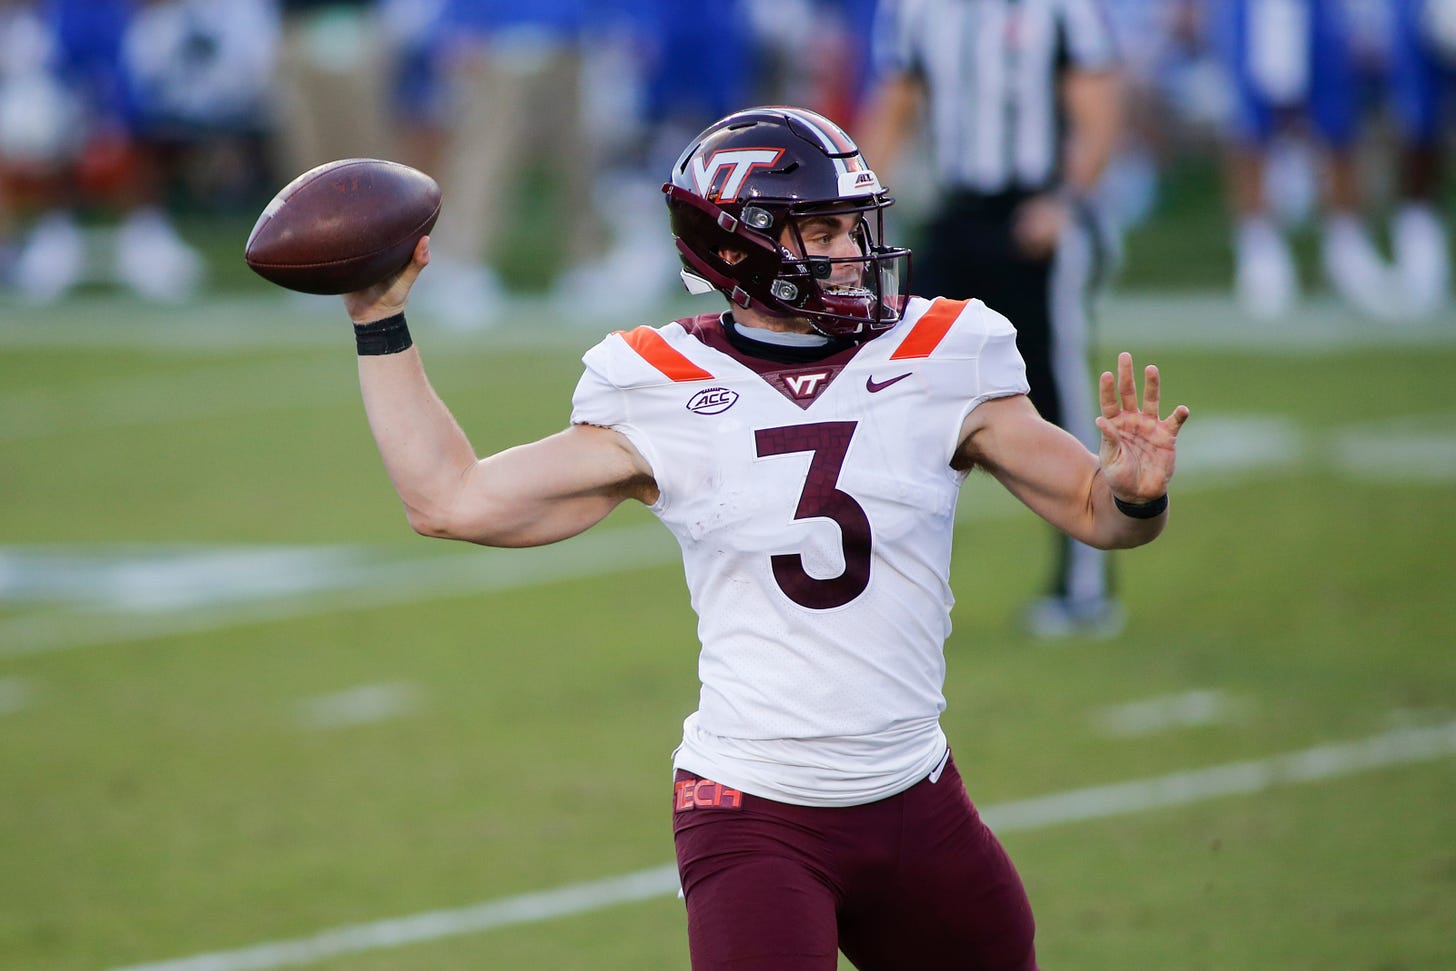 Virginia Tech Football: Can Justin Fuente right the ship in 2021?